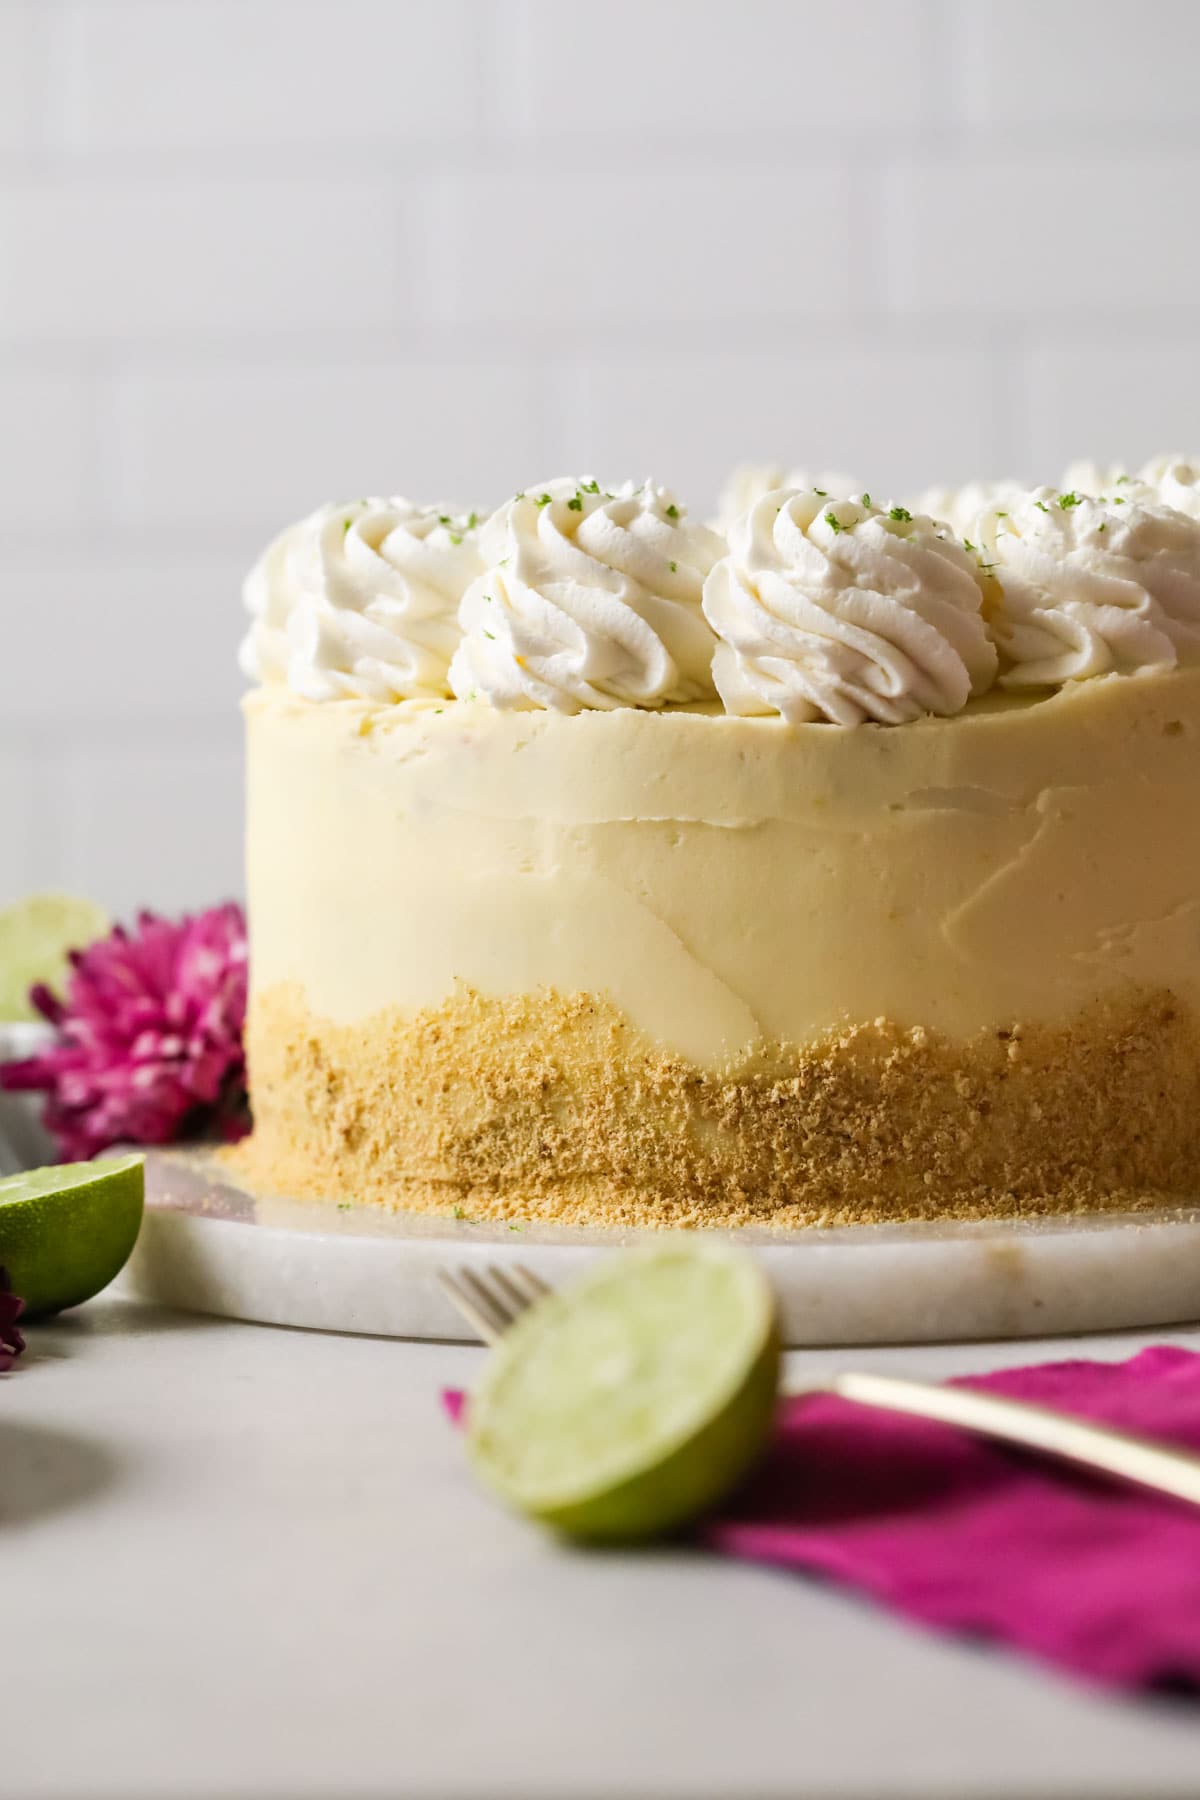 Key lime cake that's been decorated with graham cracker crumbs and piped whipped cream swirls.